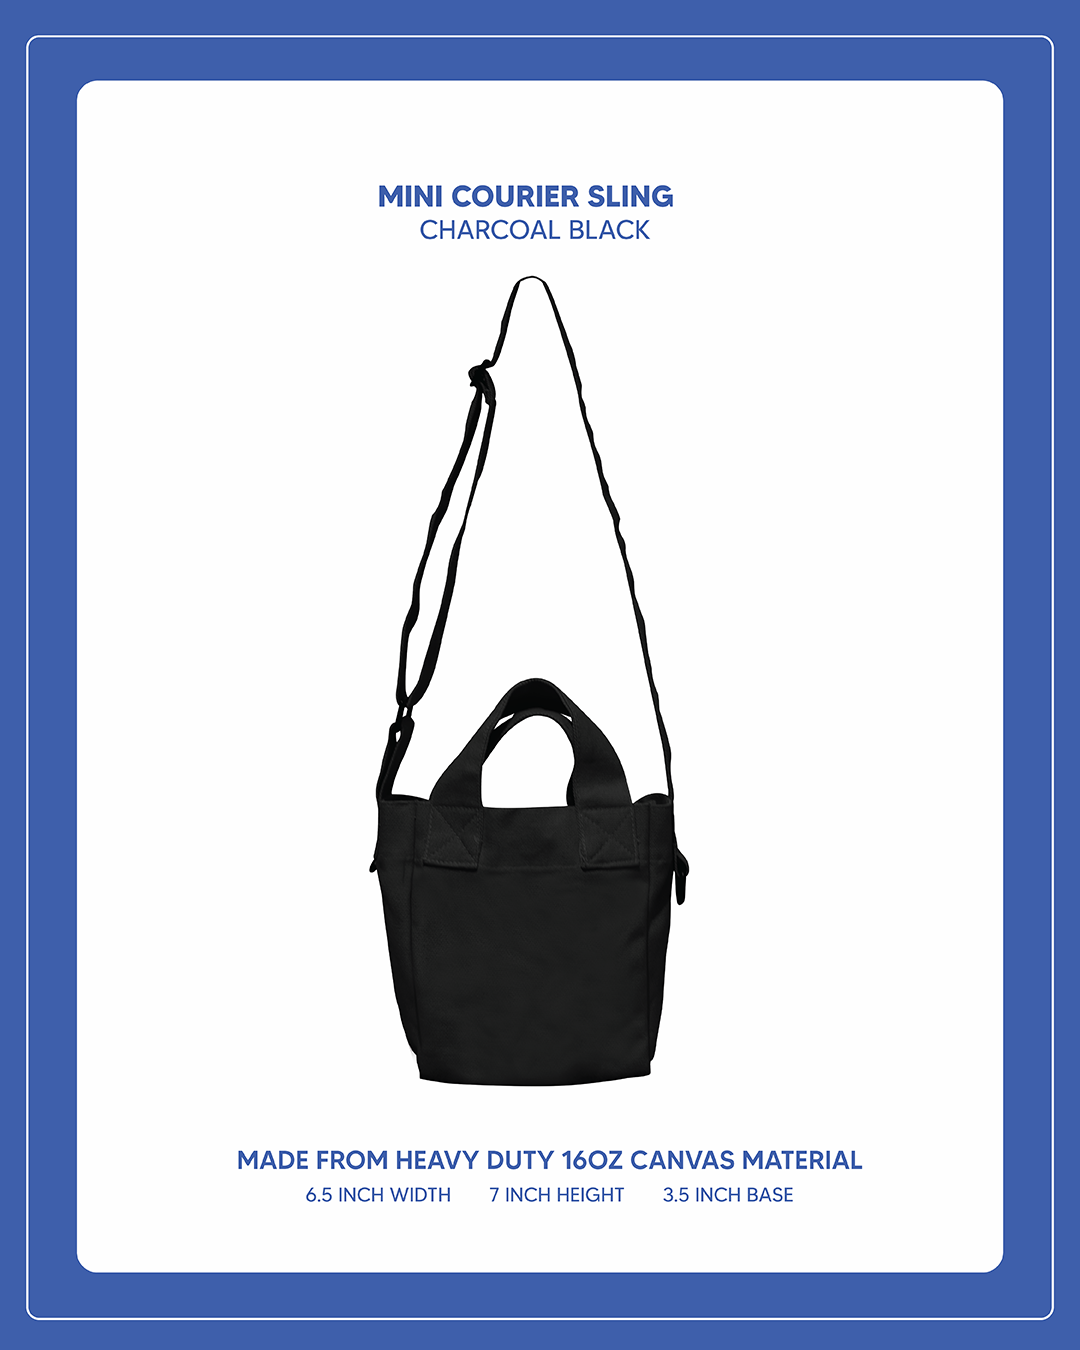 Mini Courier Sling - Charcoal Black